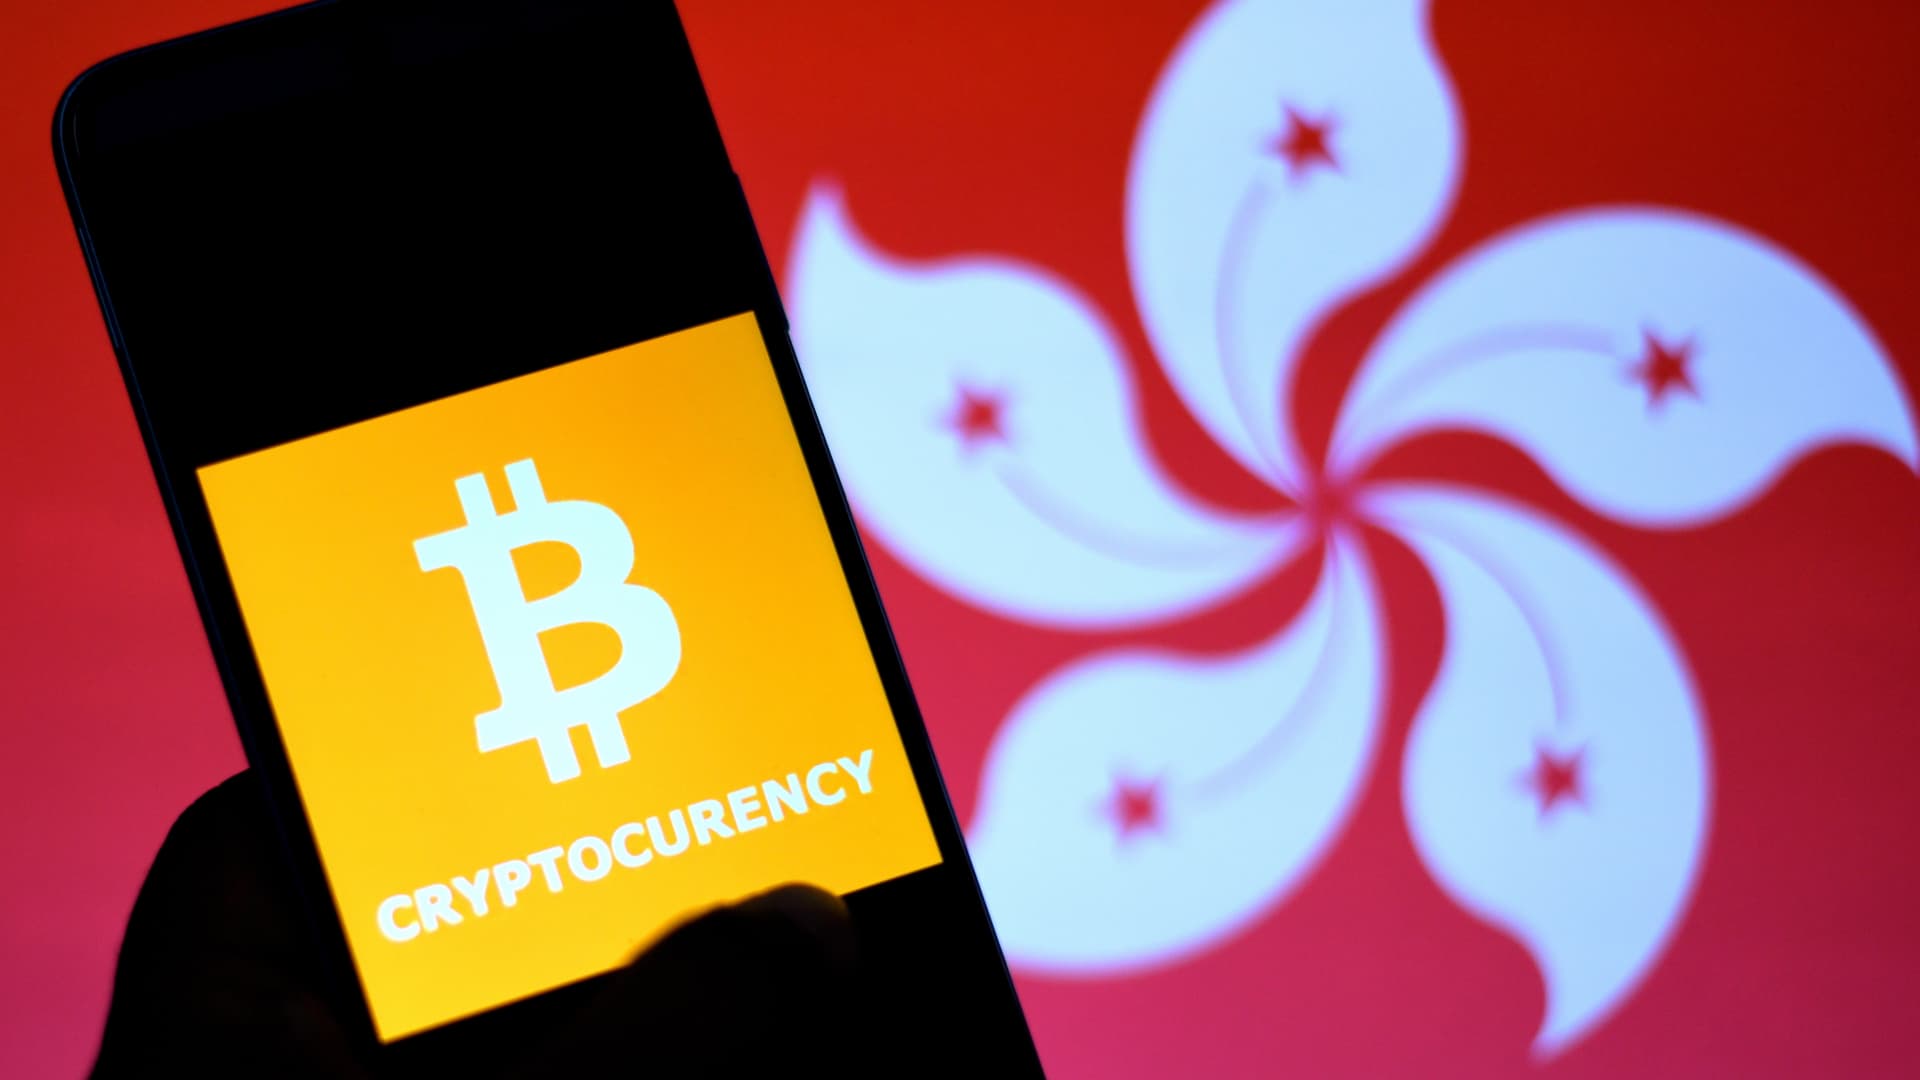 Hong Kong’s crypto hub ambitions in spite of China’s crackdown